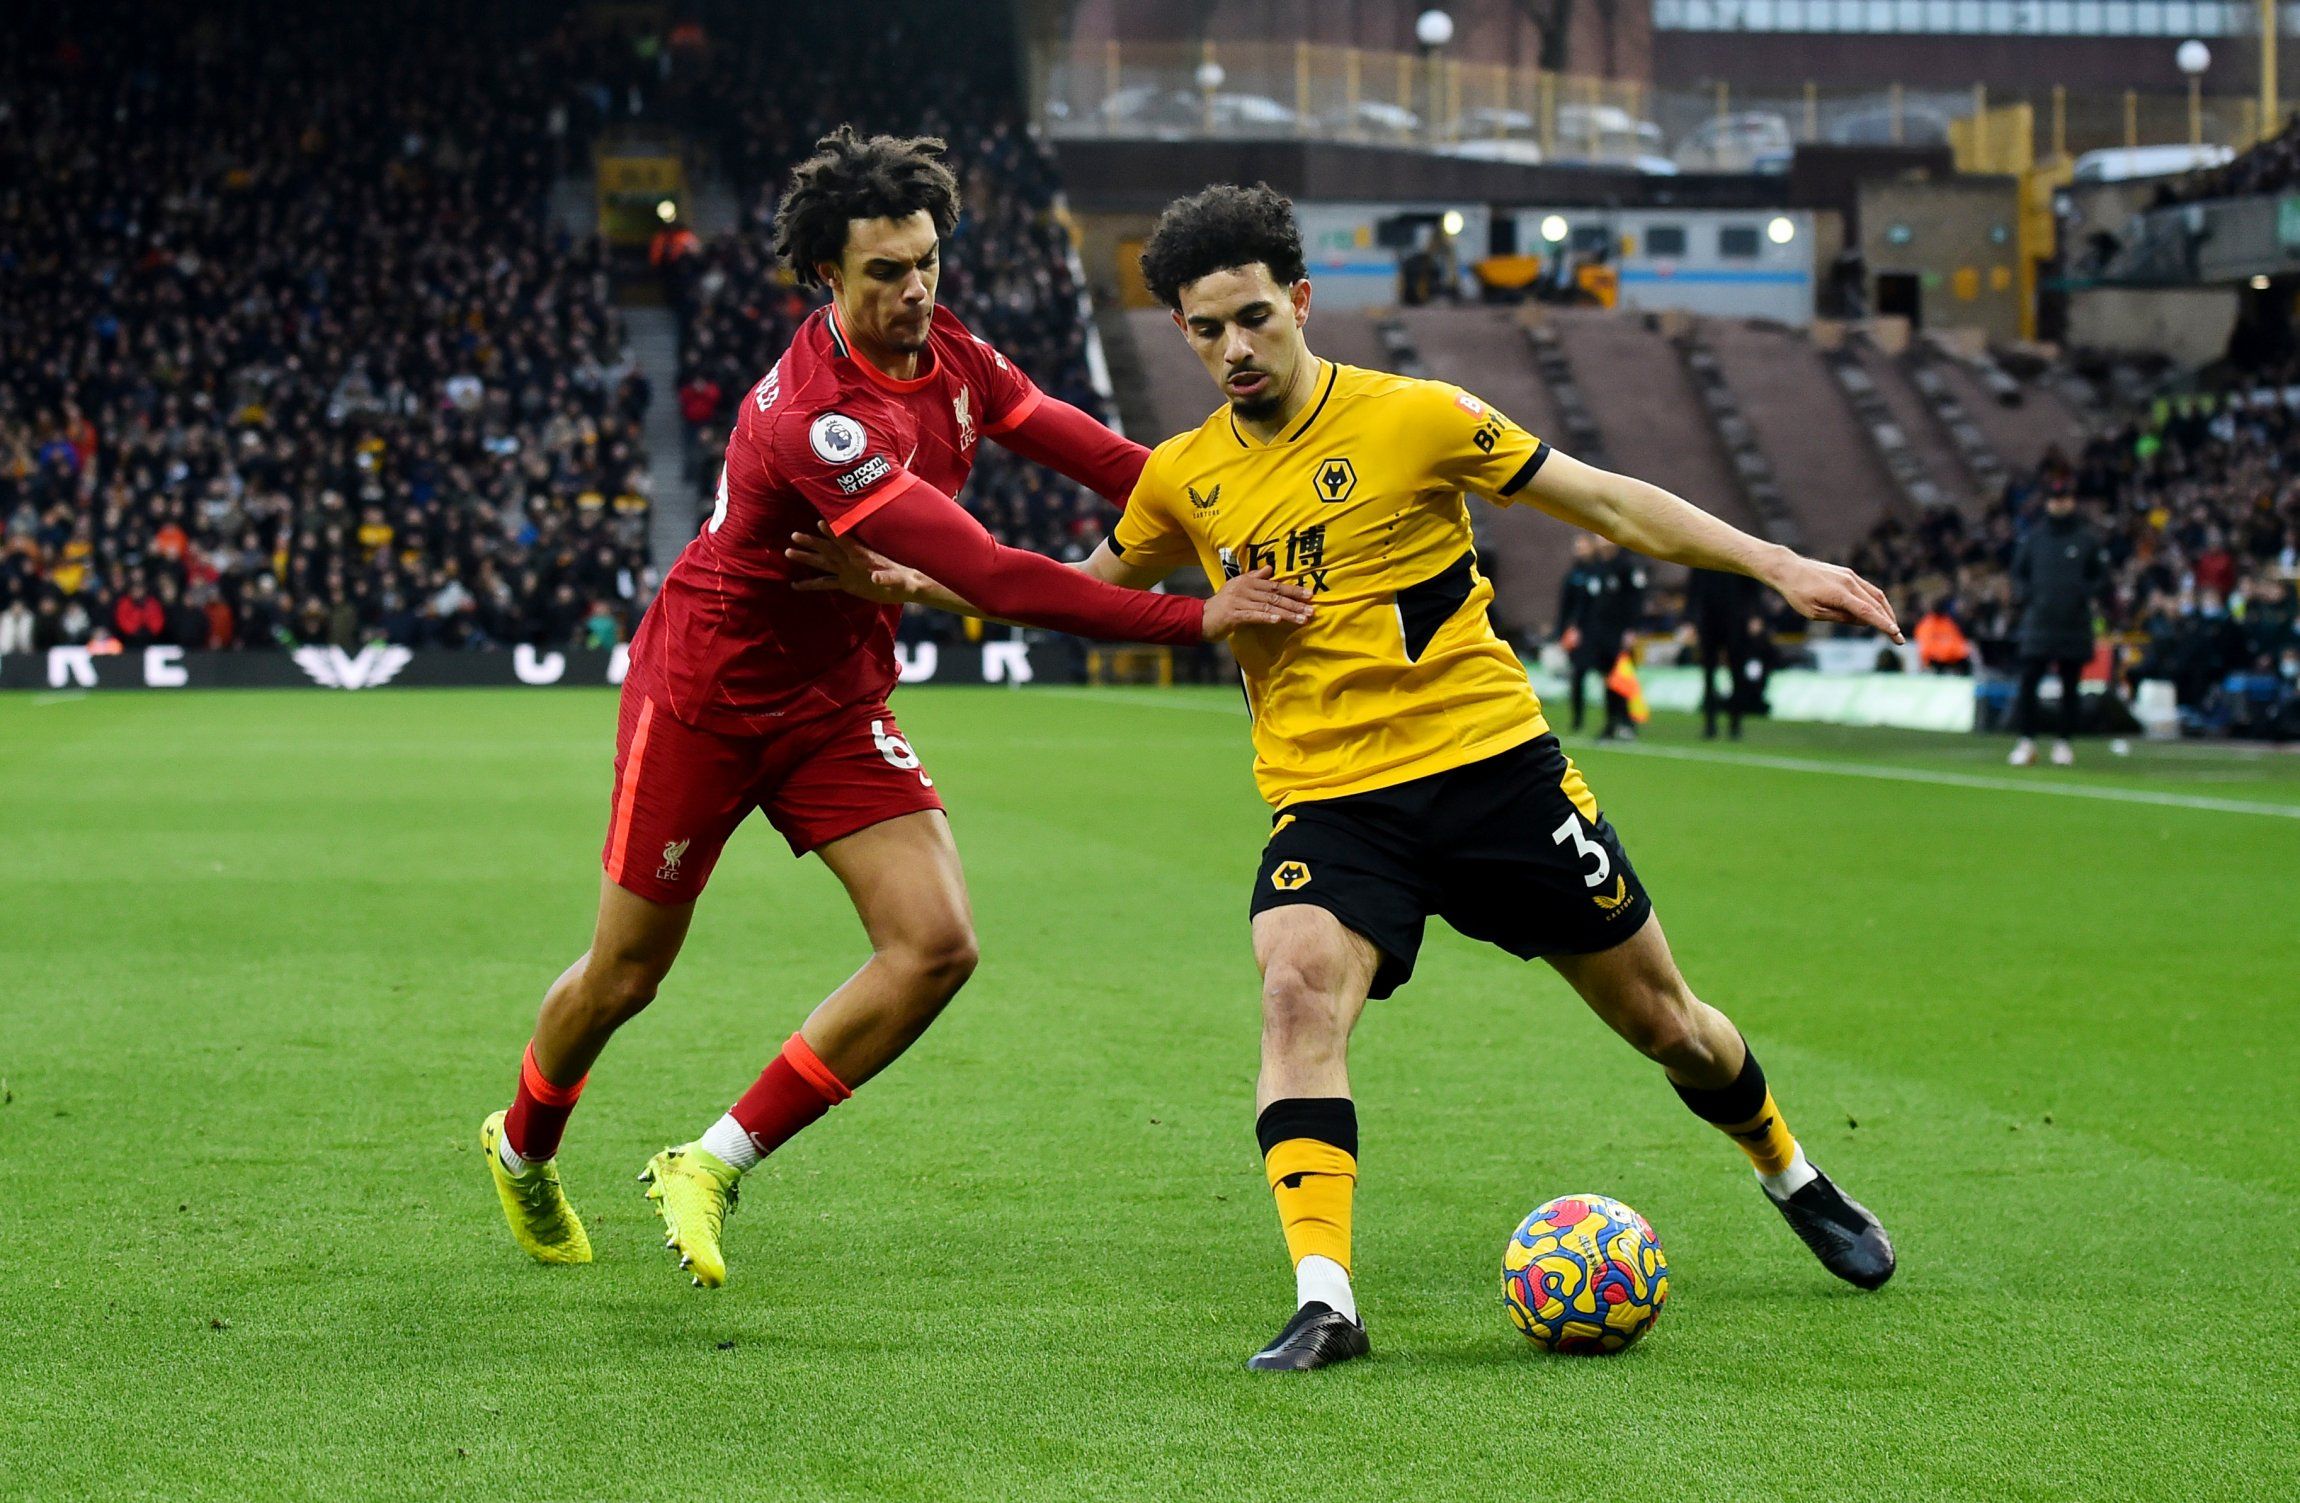 Bruno Lage, Fosun, Jeff Shi, Molineux, The Old Gold, Wolves, Wolves fans, Wolves info, Wolves latest, Wolves news, Wolves updates, WWFC, WWFC news, WWFC update, Premier League, Premier League news, Wolverhampton Wanderers, Rayan Ait-Nouri, Wolves transfer news, January transfer window,
